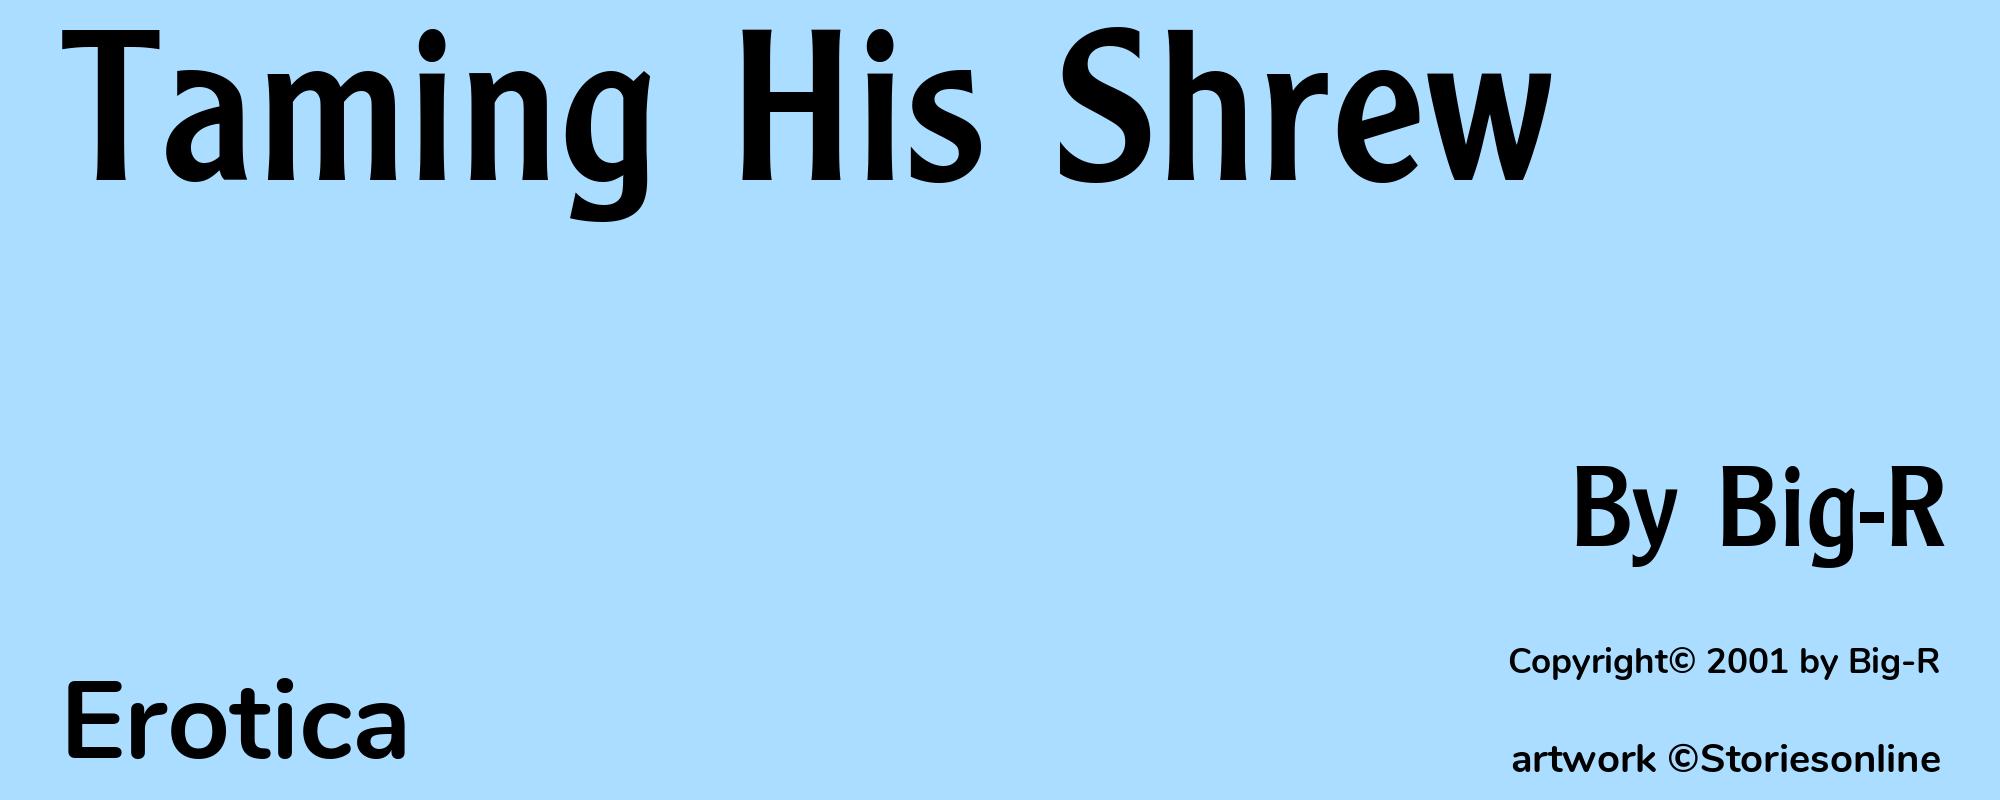 Taming His Shrew - Cover